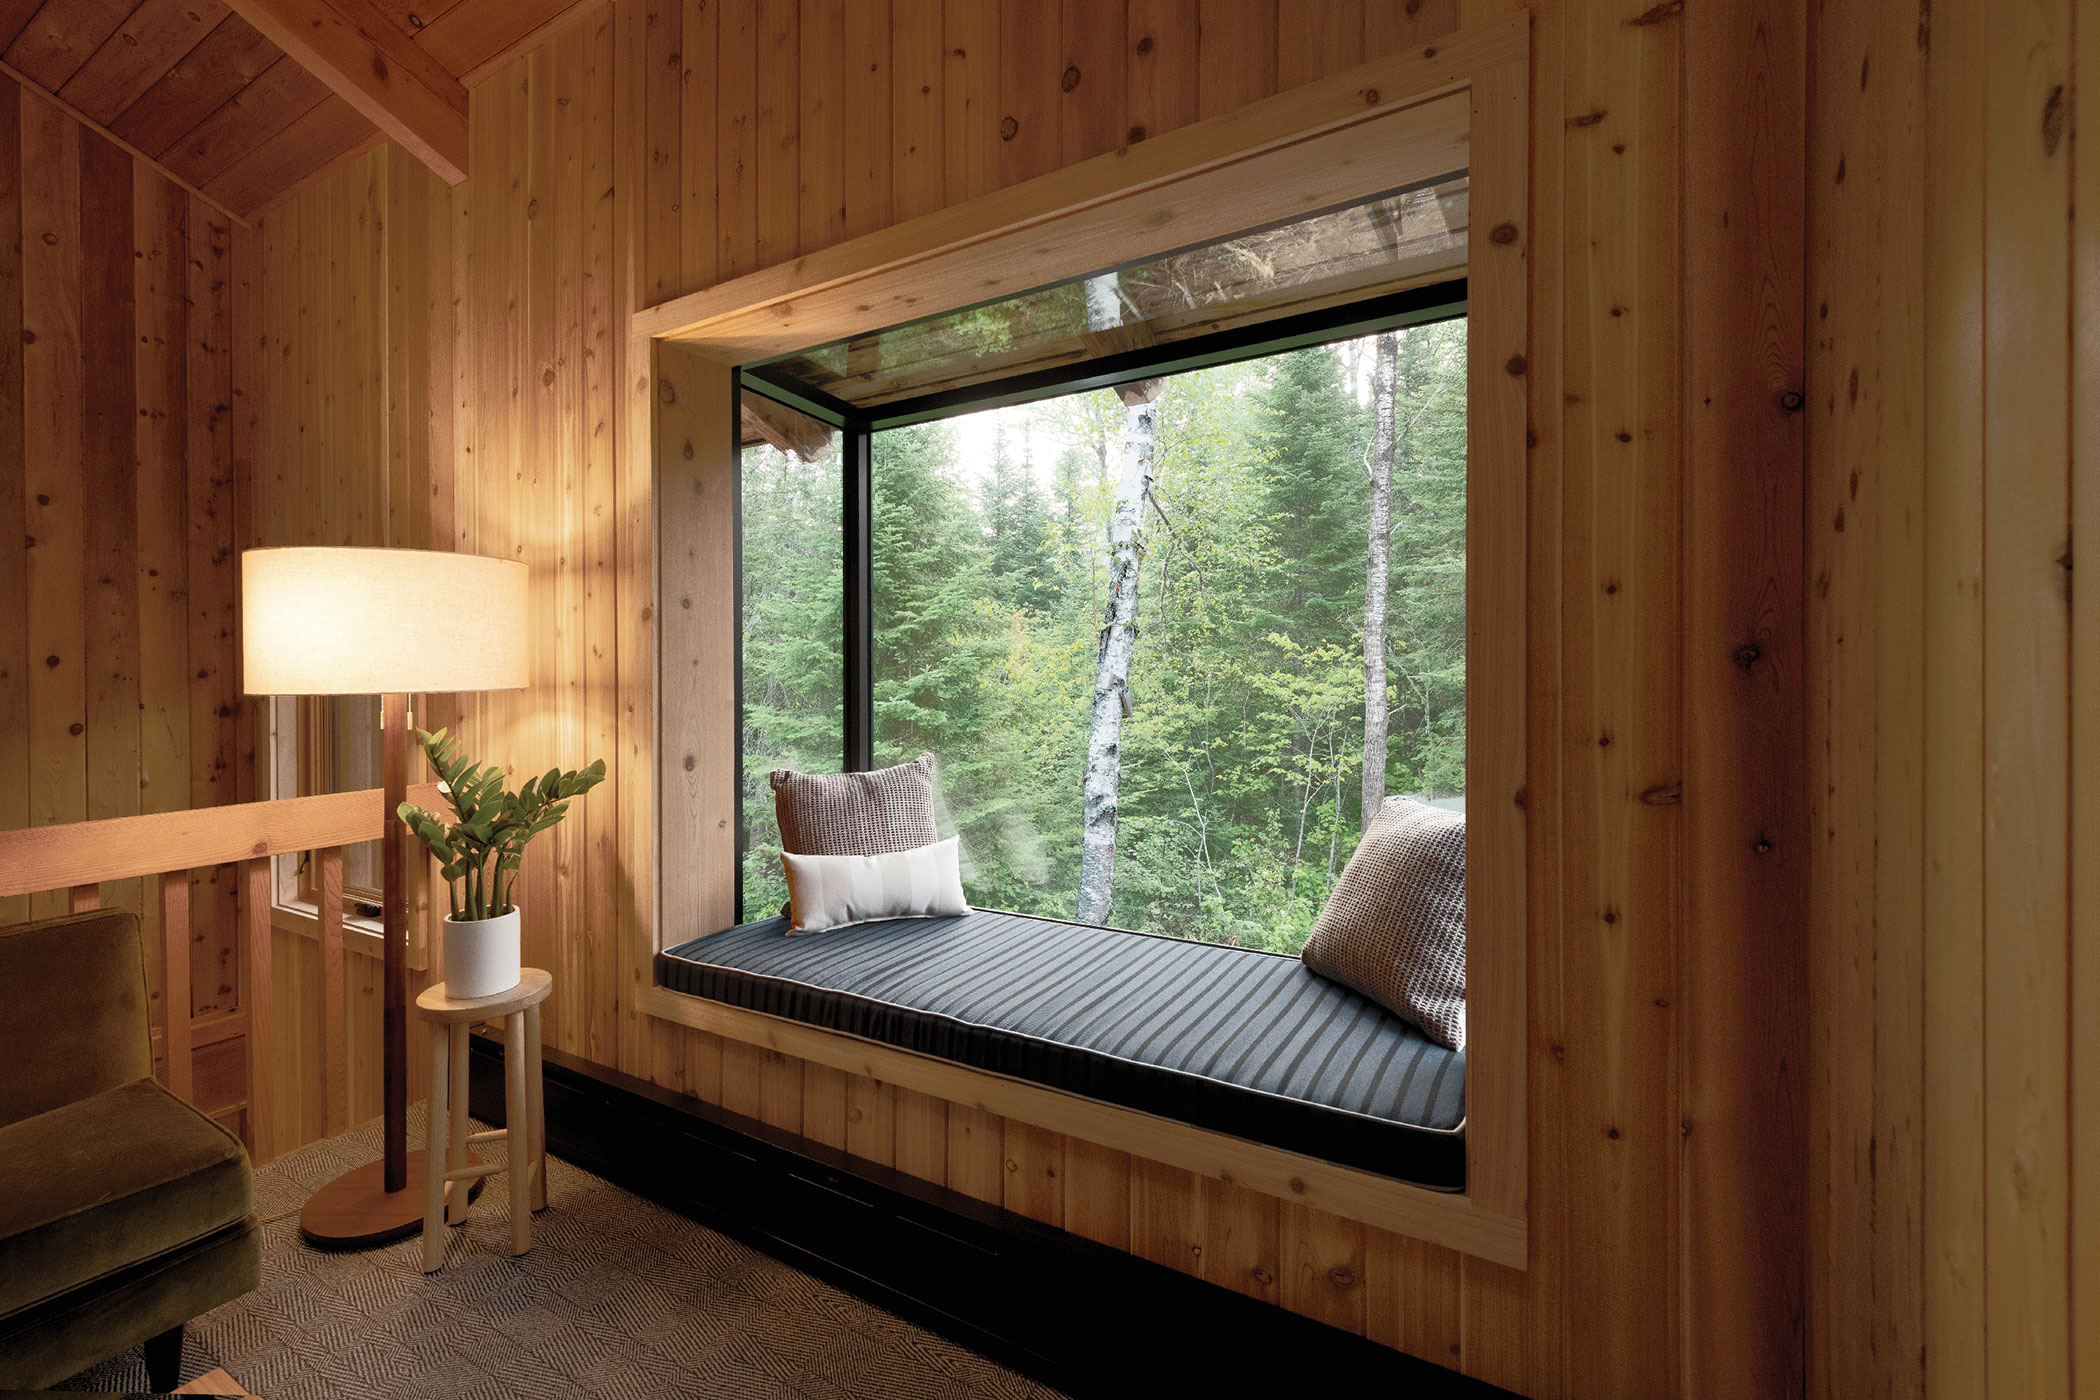 A Sky cove glass sitting area with wood paneling around it